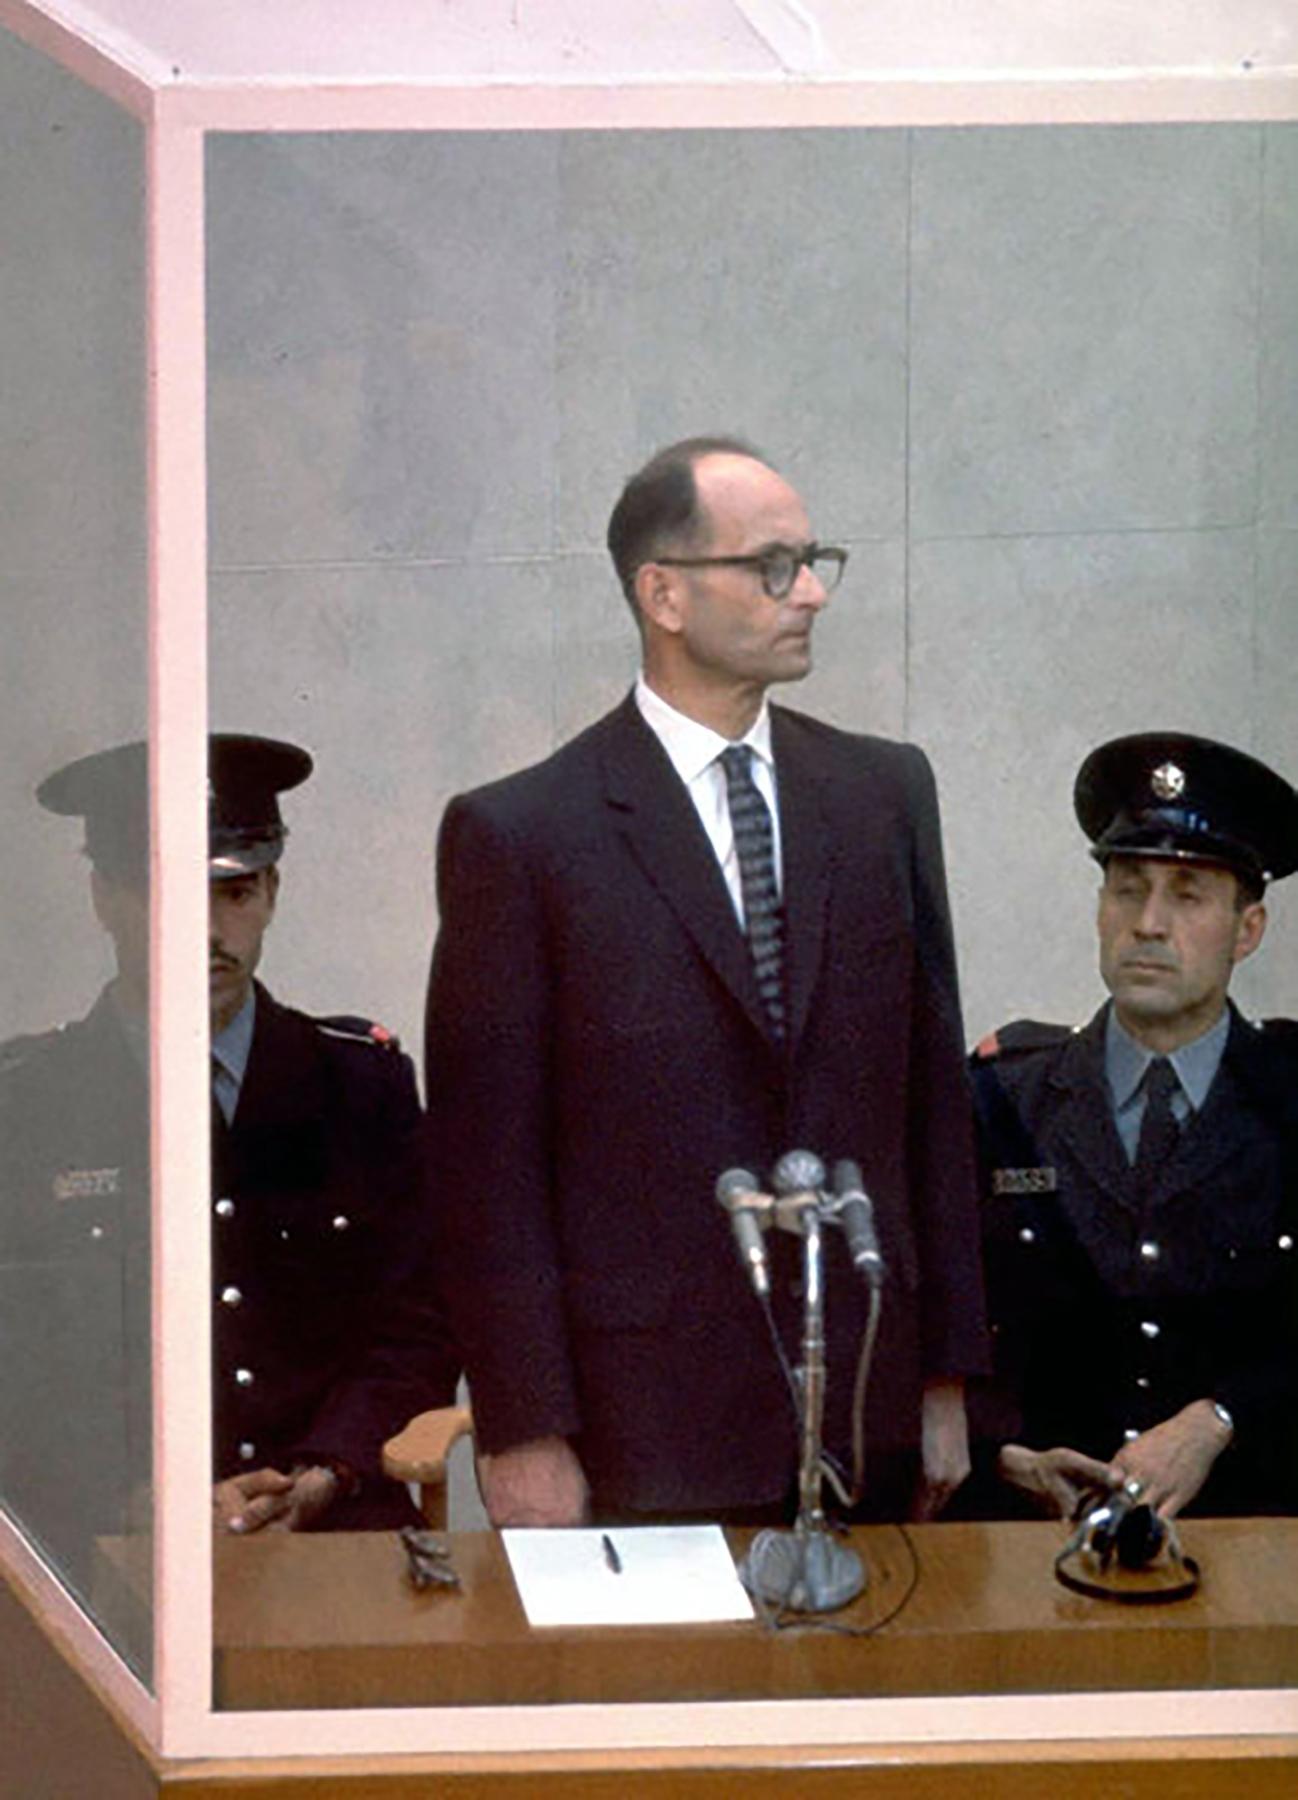 Adolf Eichmann Trial at Beit Ha’am in Jerusalem, Israel, 1961 Photo courtesy of Government Press Office